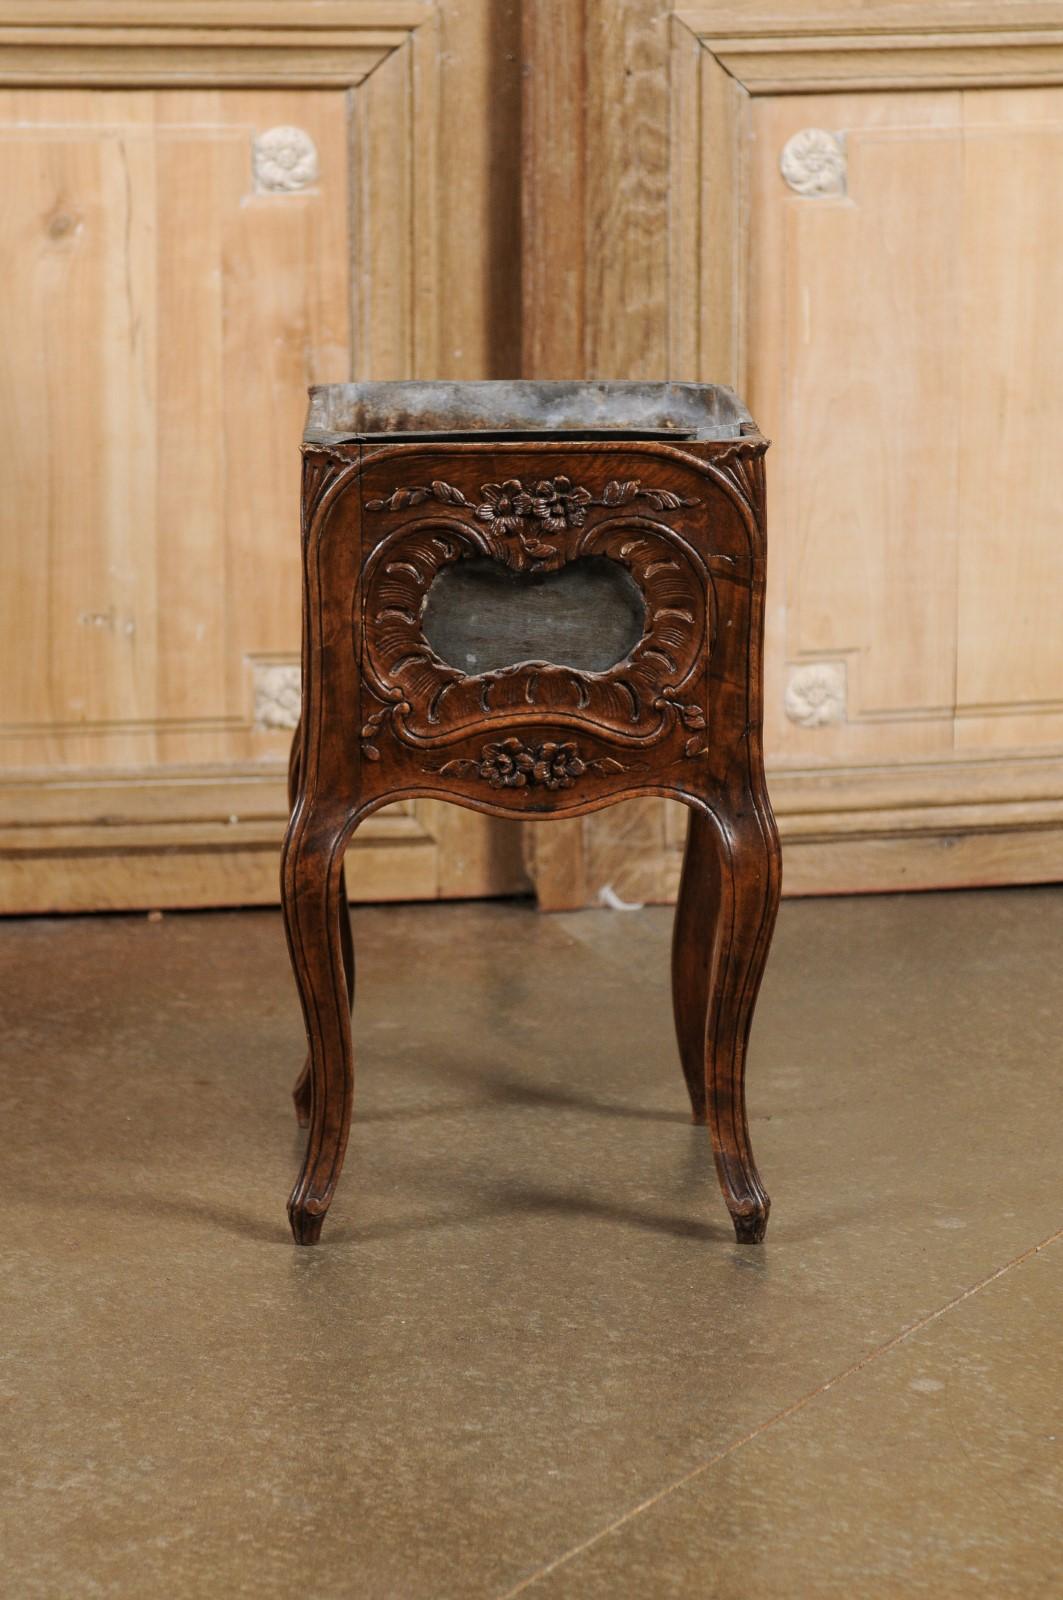 French 1890s Rococo Revival Walnut Planter with Rocailles and Floral Motifs For Sale 2